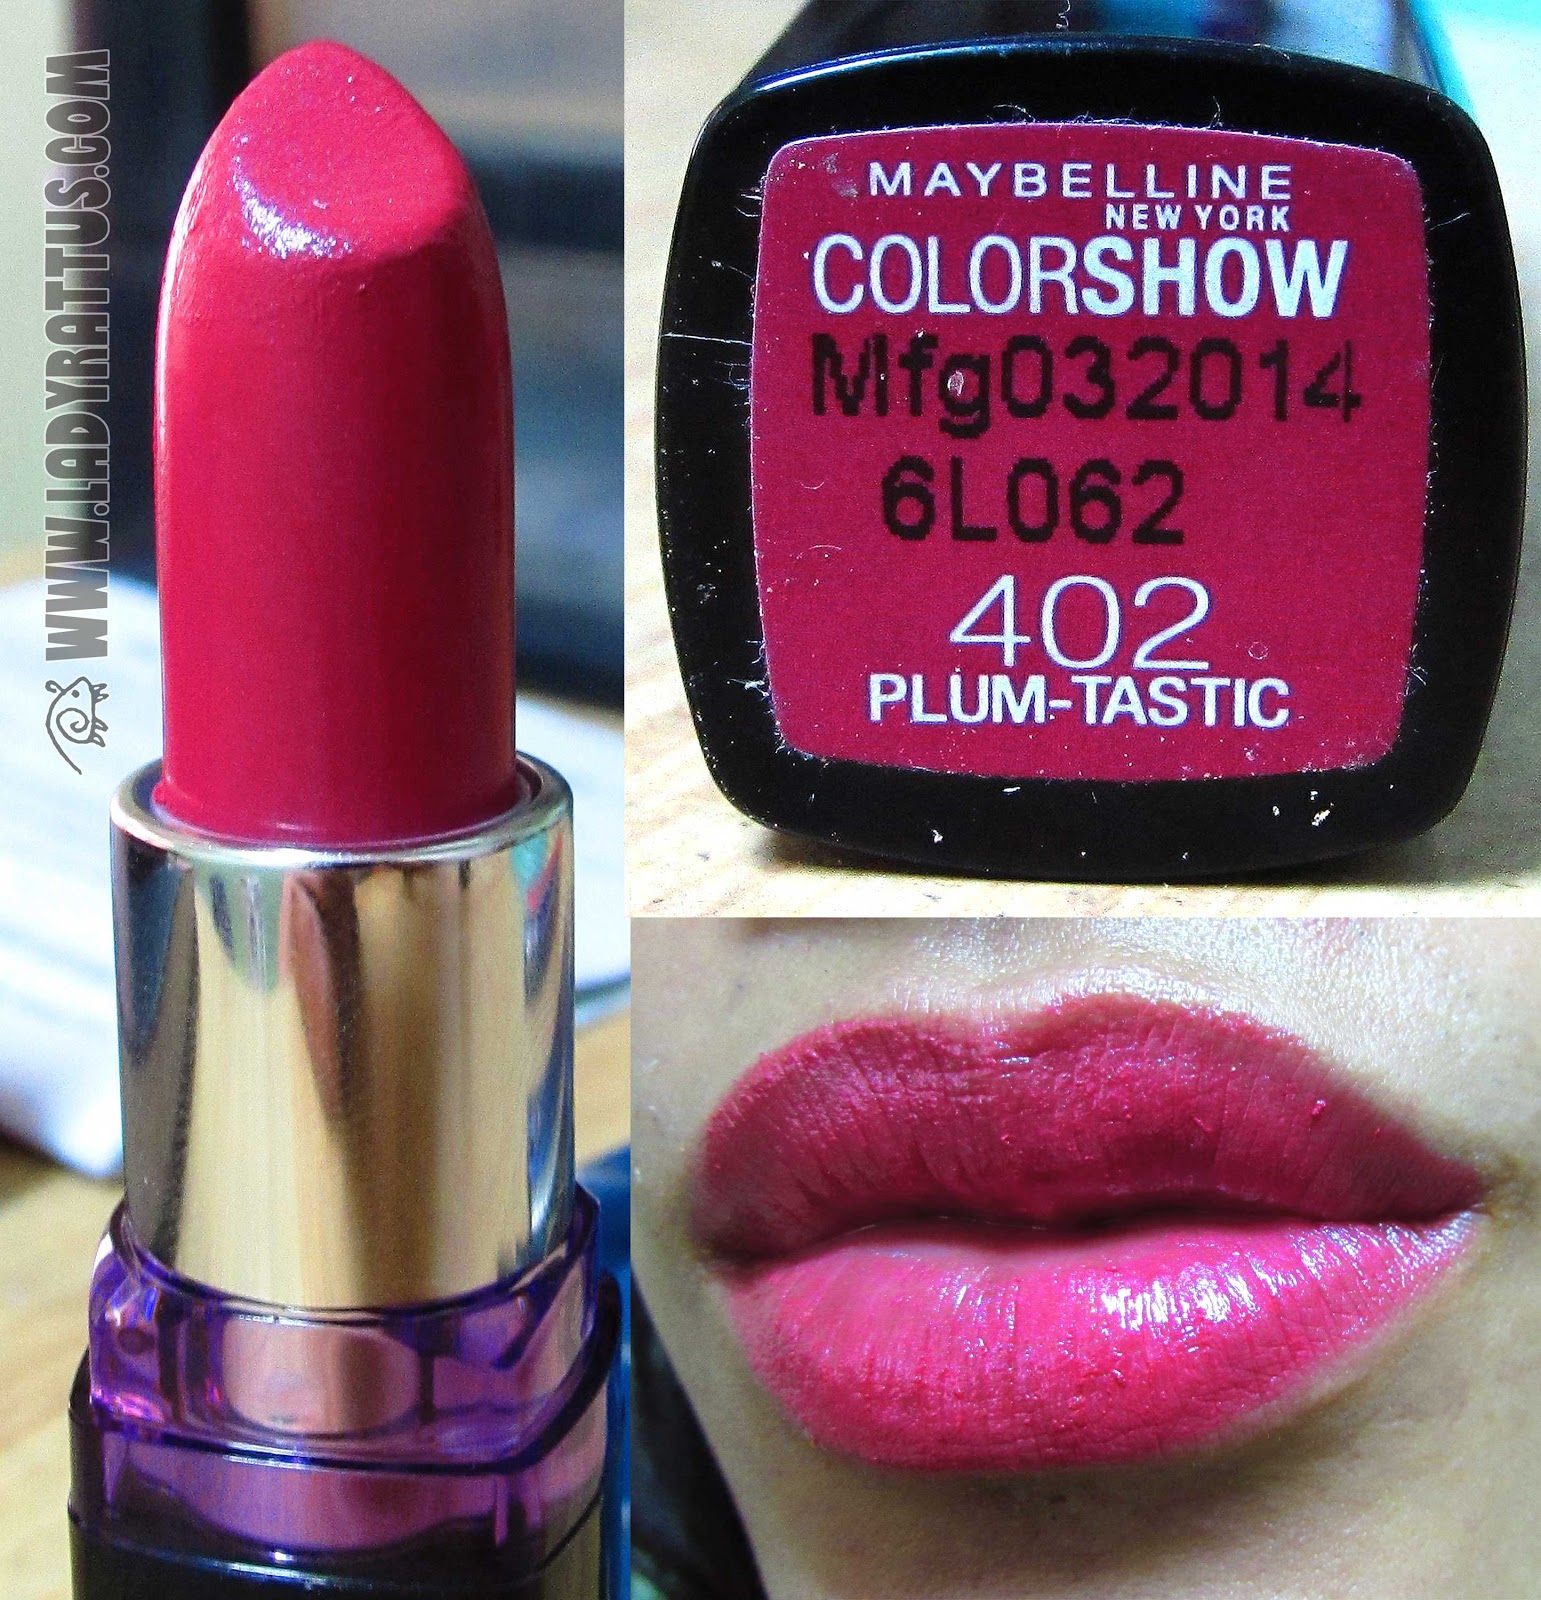 Maybelline ColorShow Lipstick... True Toffee, Party Pink, and Plum-Tastic